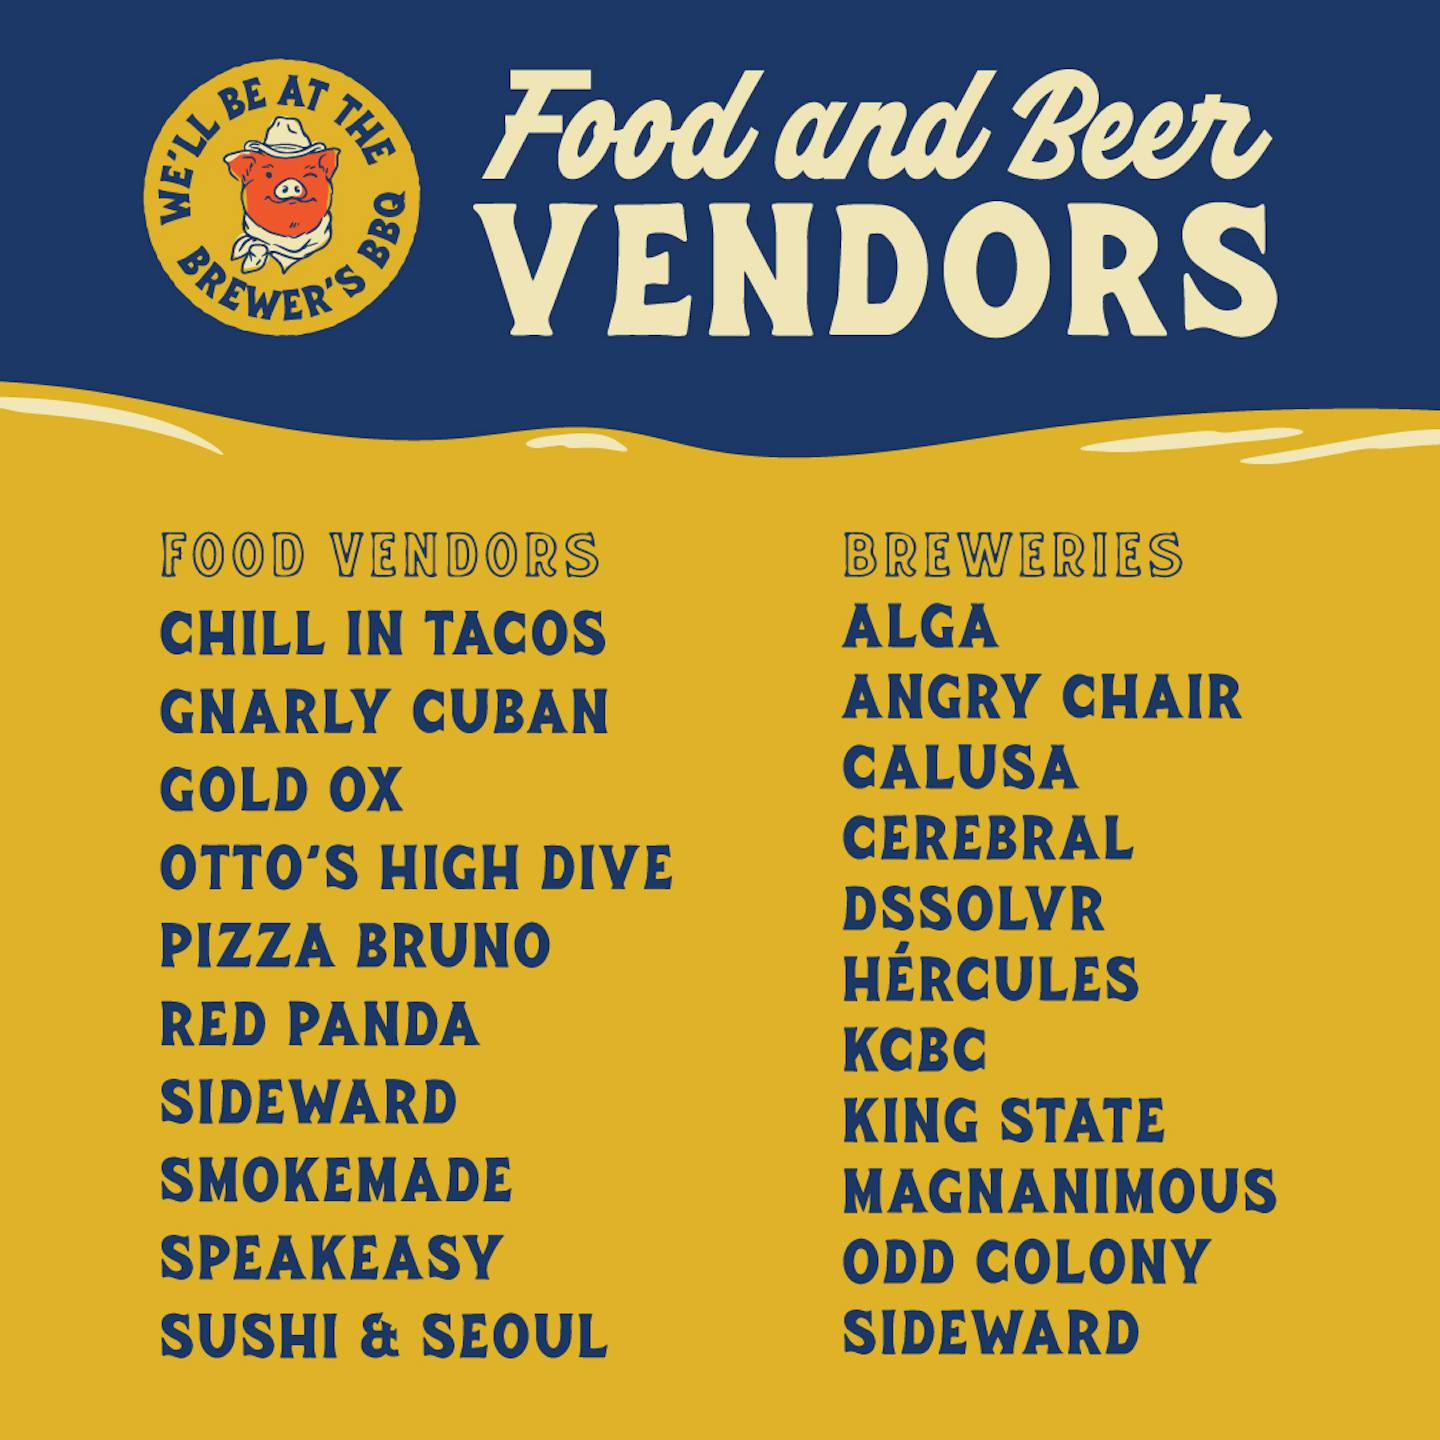 Sideward_Promo_Brewers-BBQ_Social_Food-and-Beer-Vendors-01